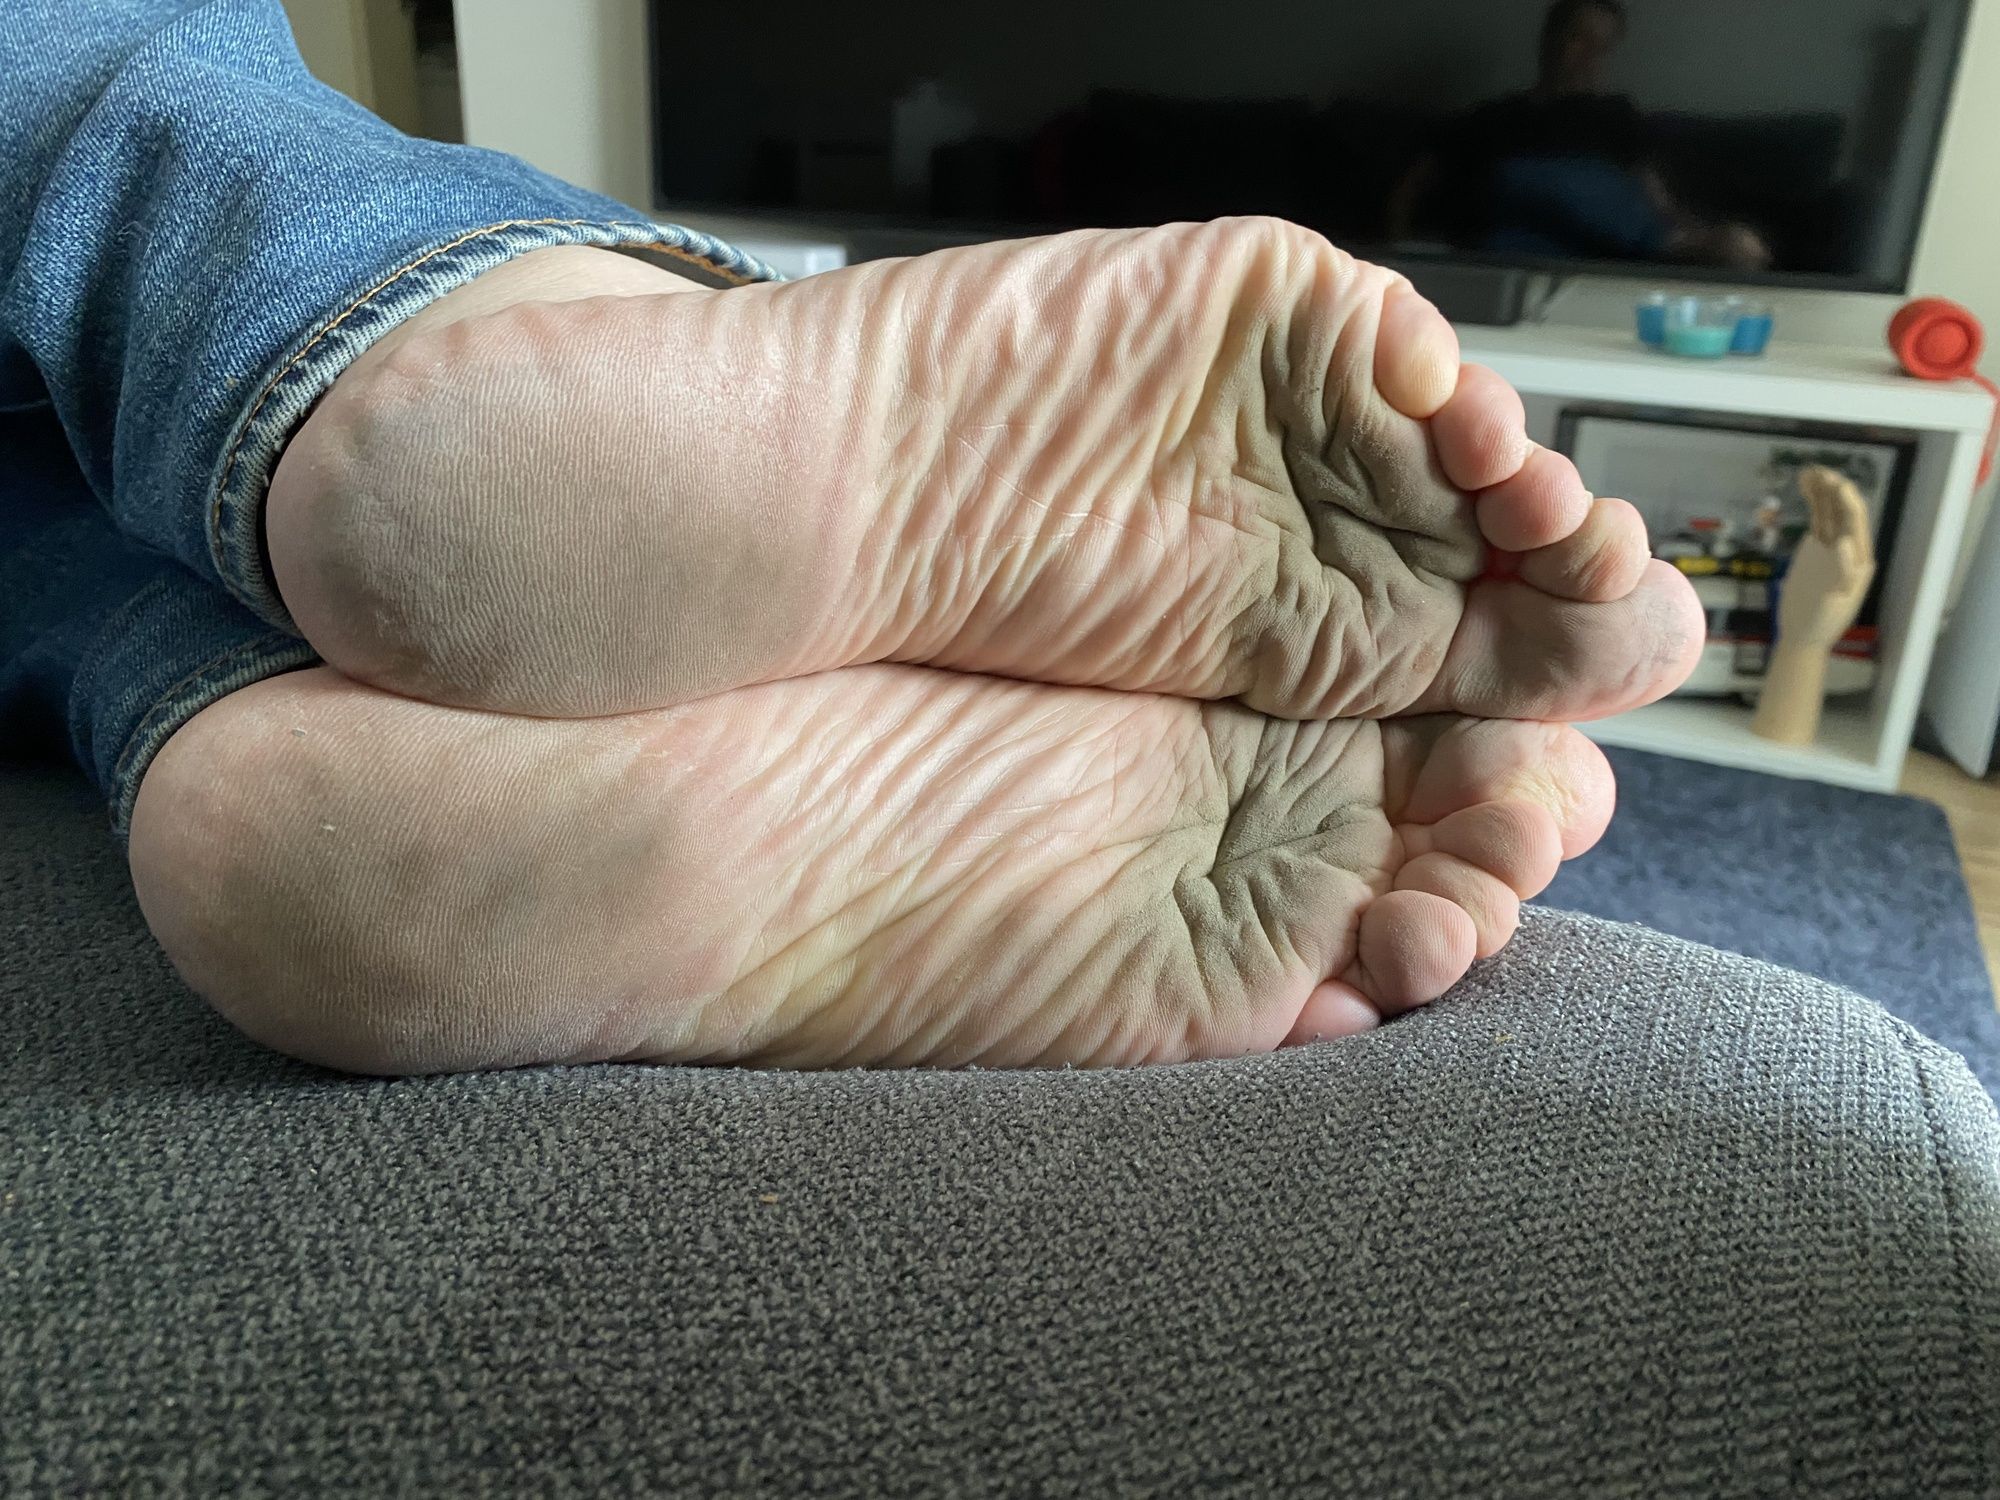 For the love of feet #6